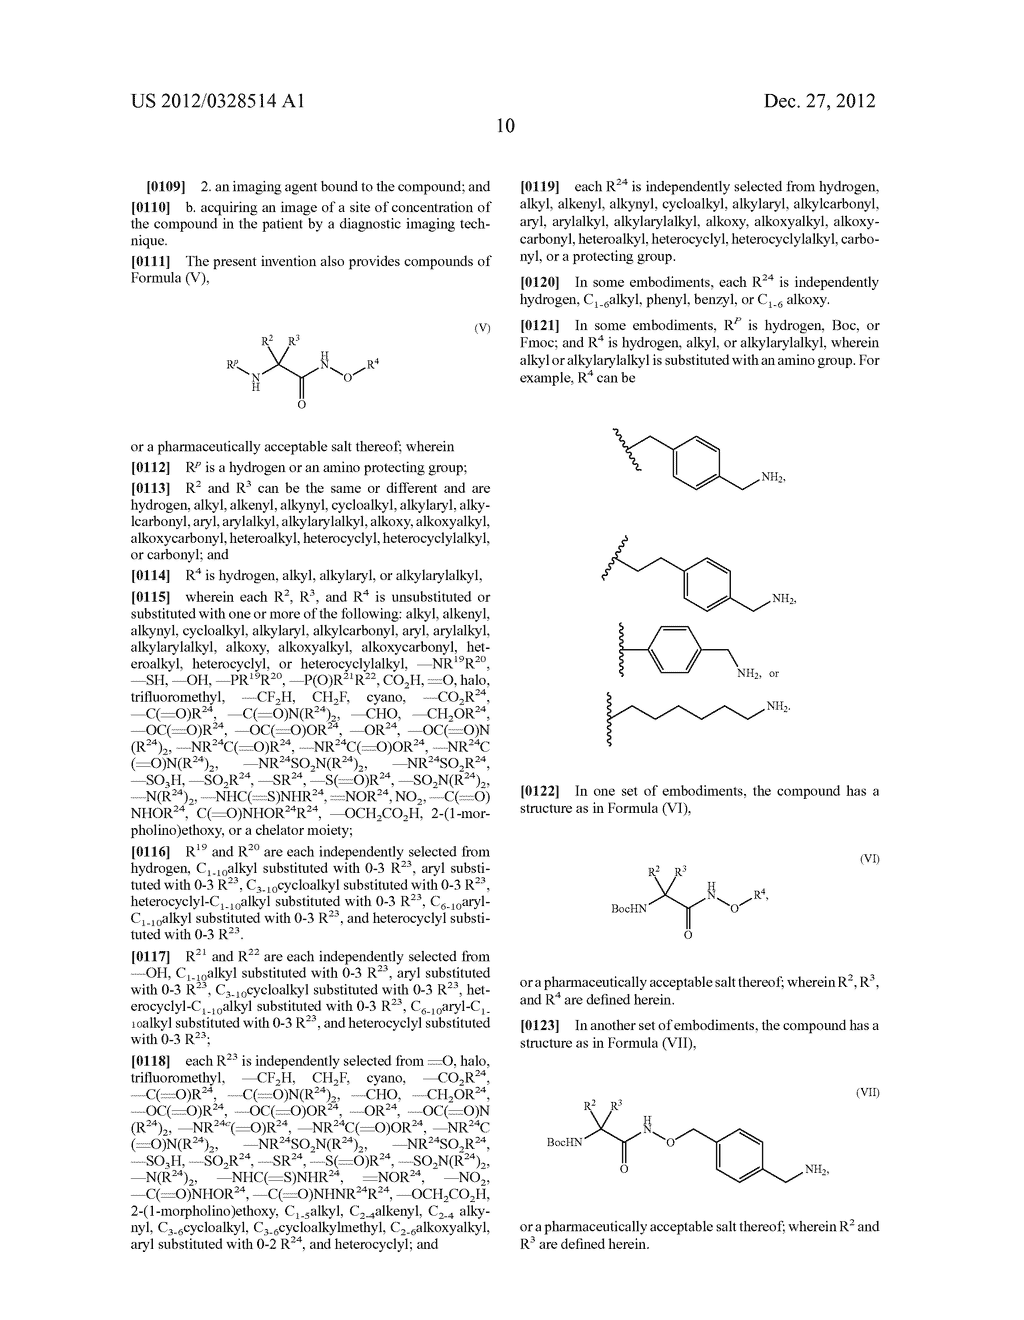 N-ALKOXYAMIDE CONJUGATES AS IMAGING AGENTS - diagram, schematic, and image 12